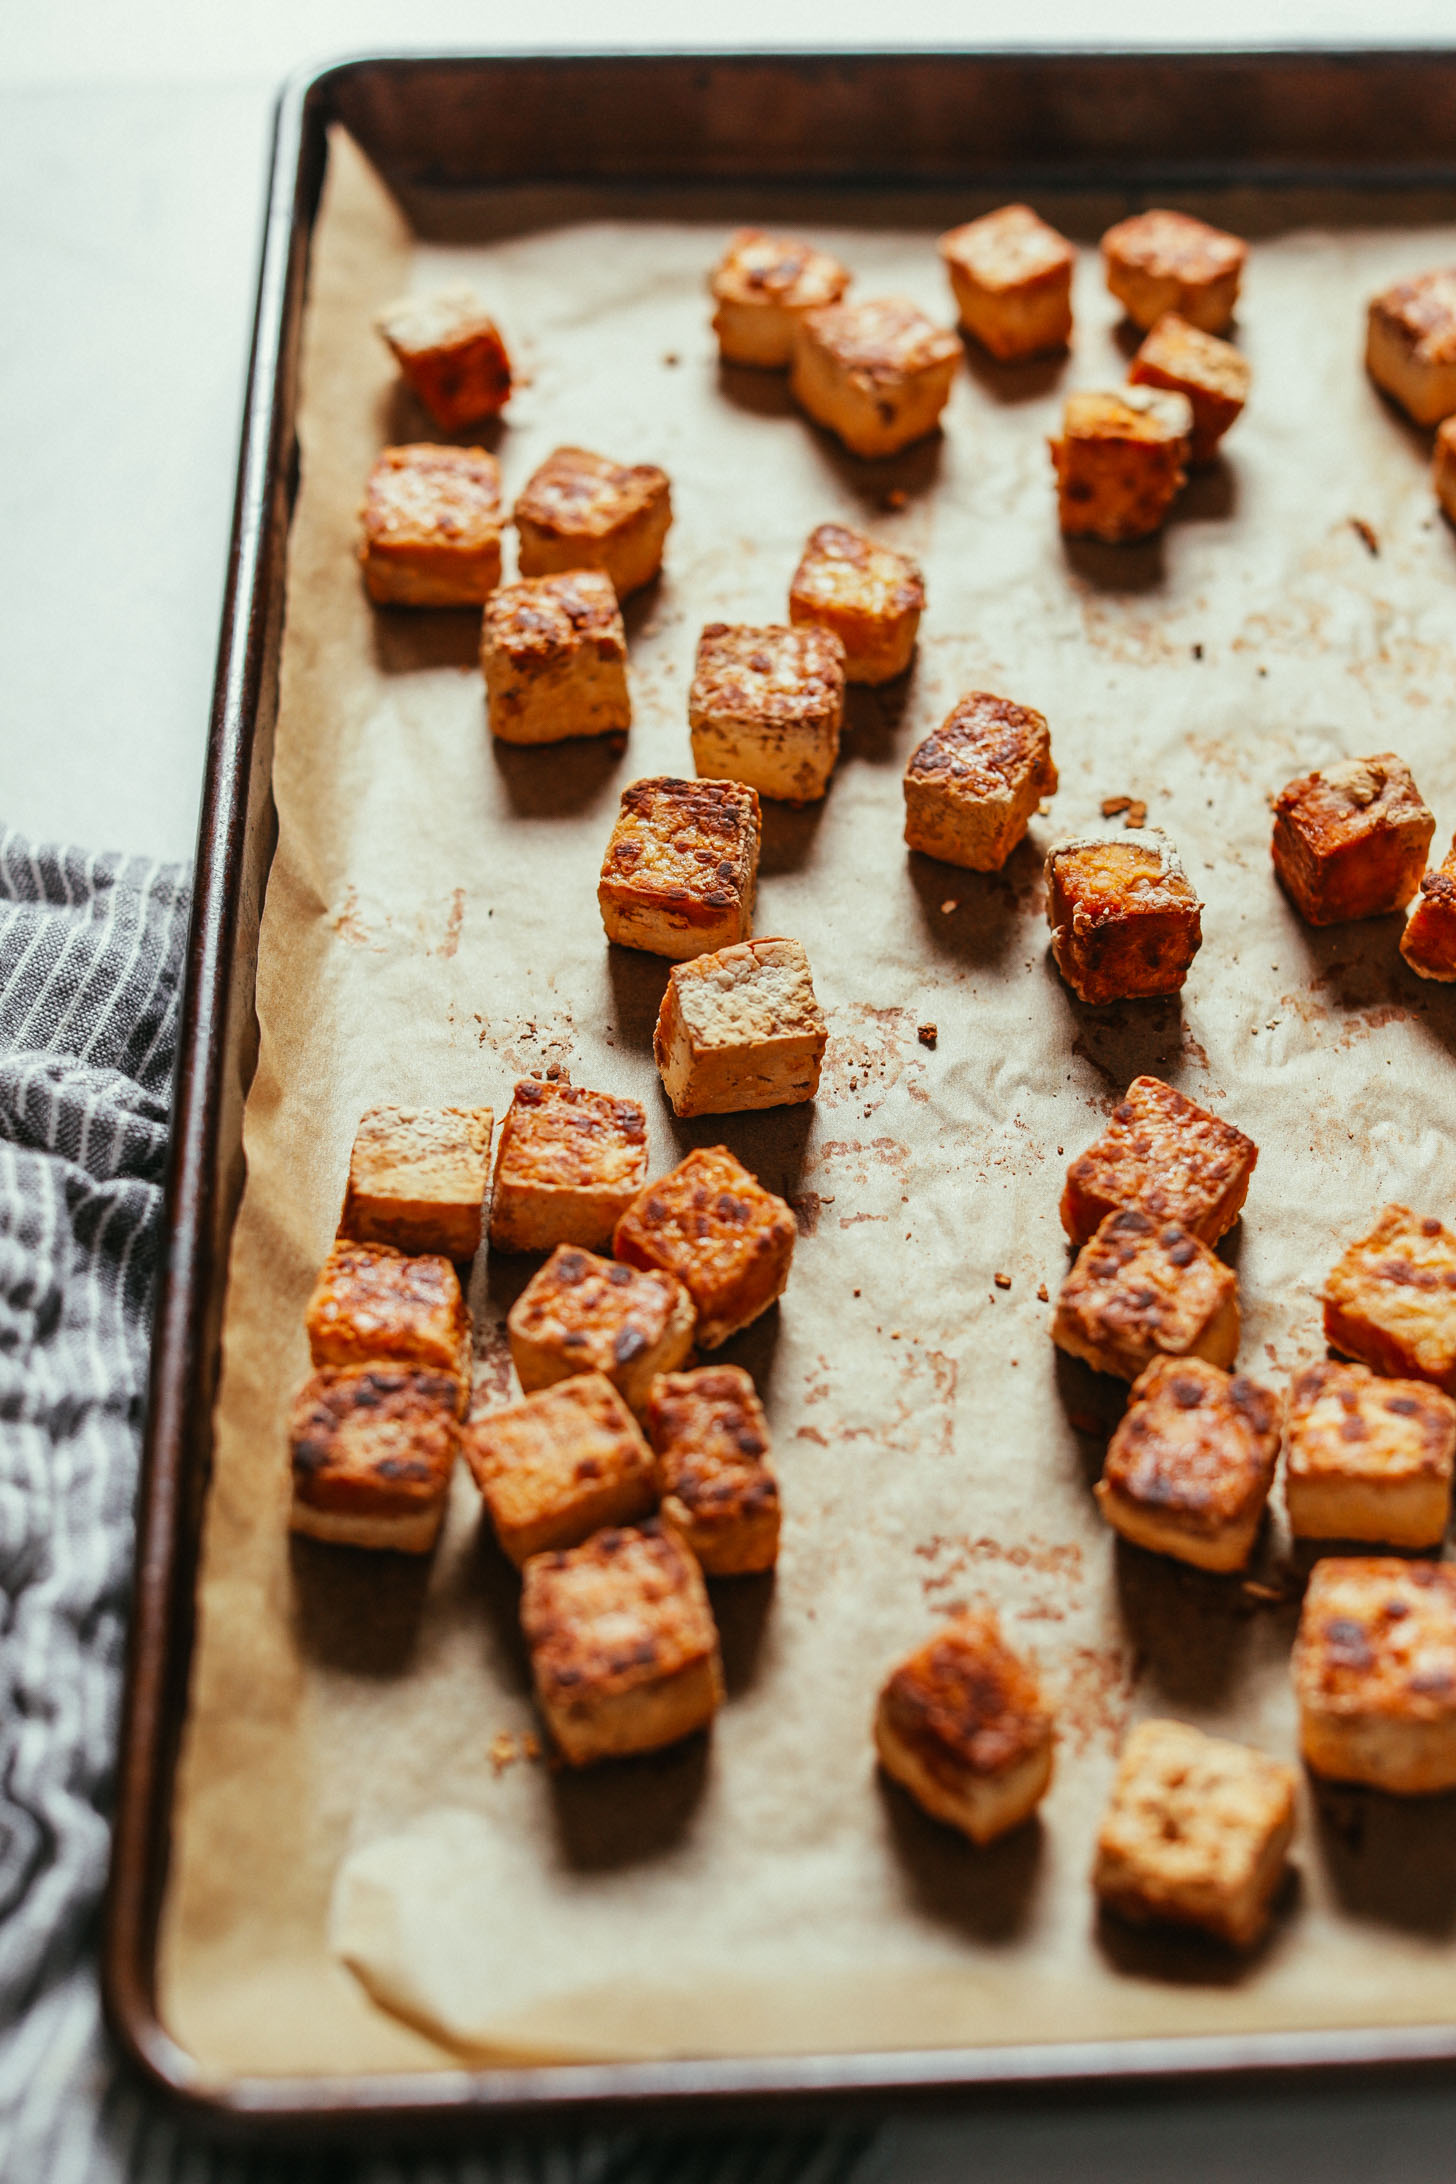 Parchment-lined baking sheet filled with Crispy Tofu fresh from the oven